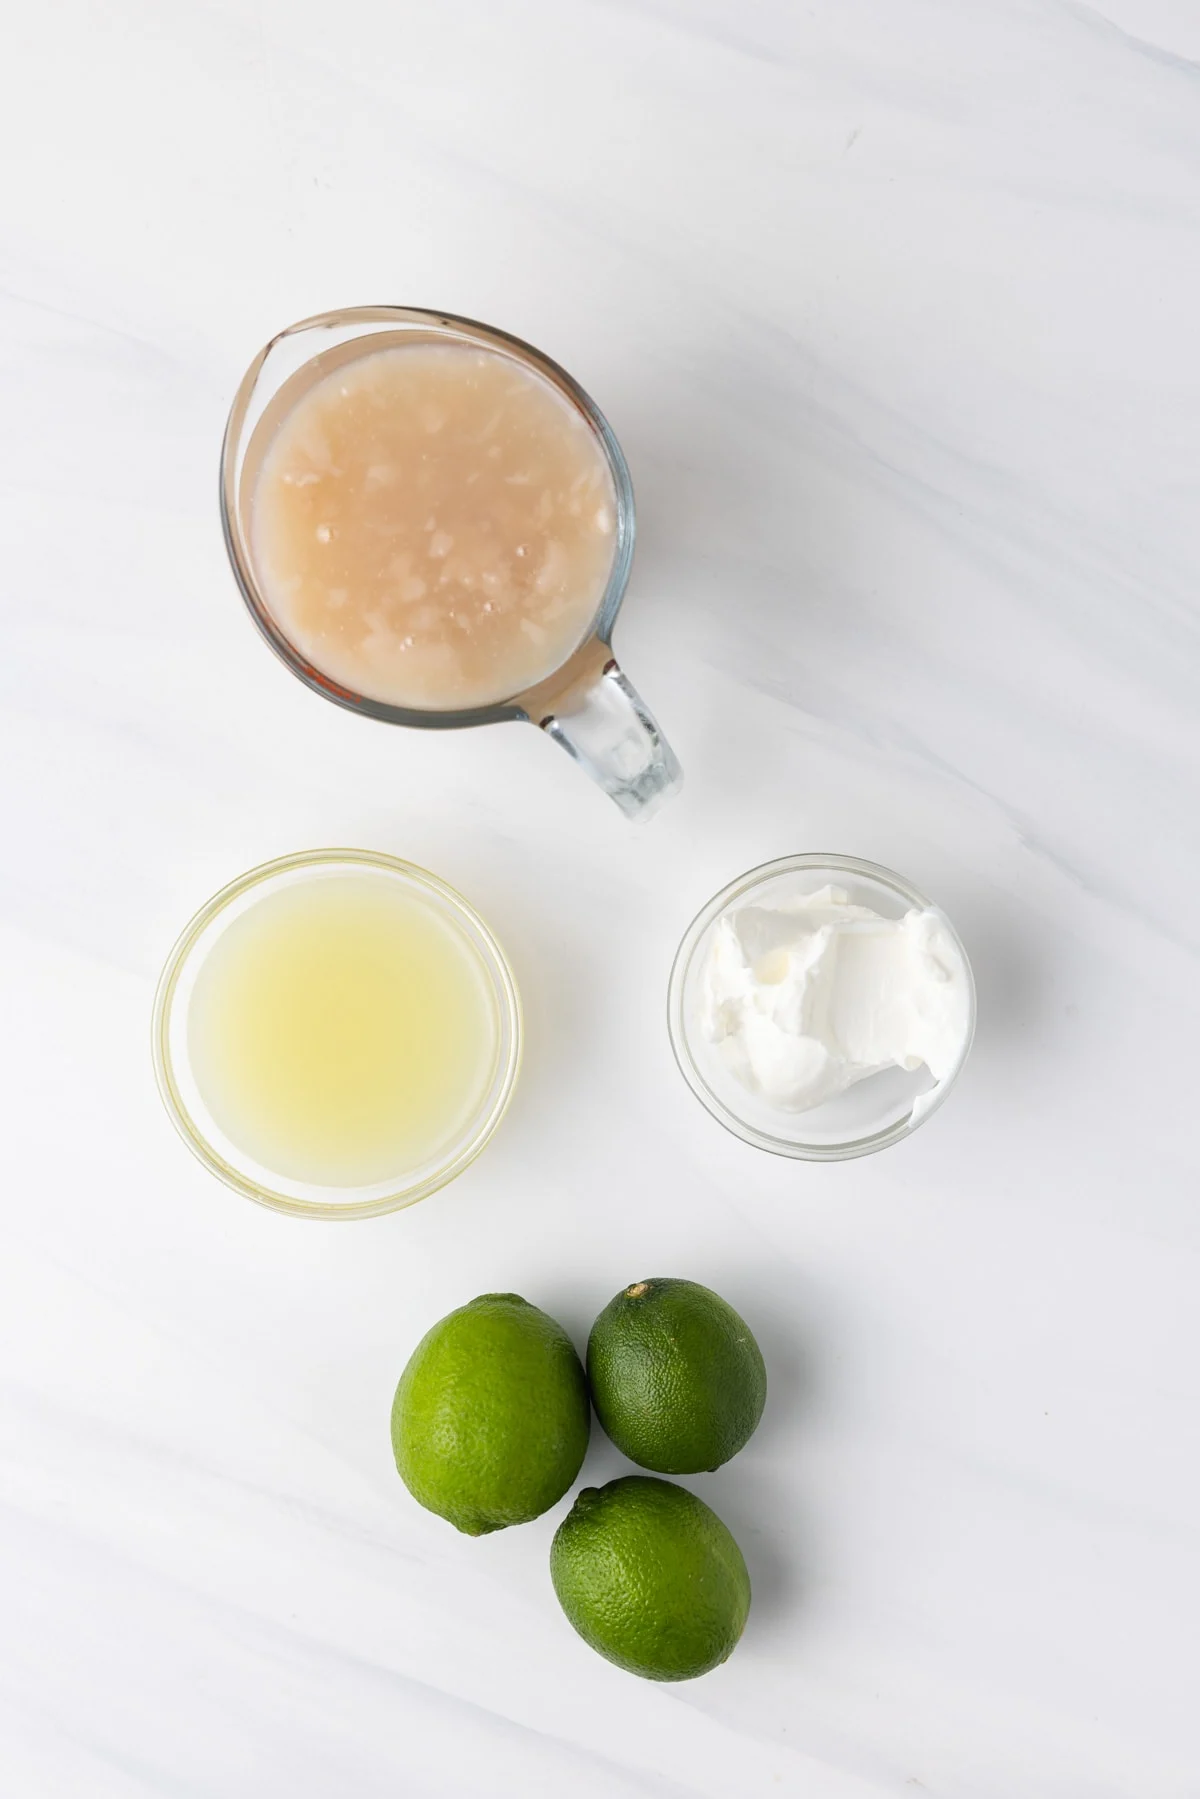 Coconut cream, lime juice, sour cream, and limes.